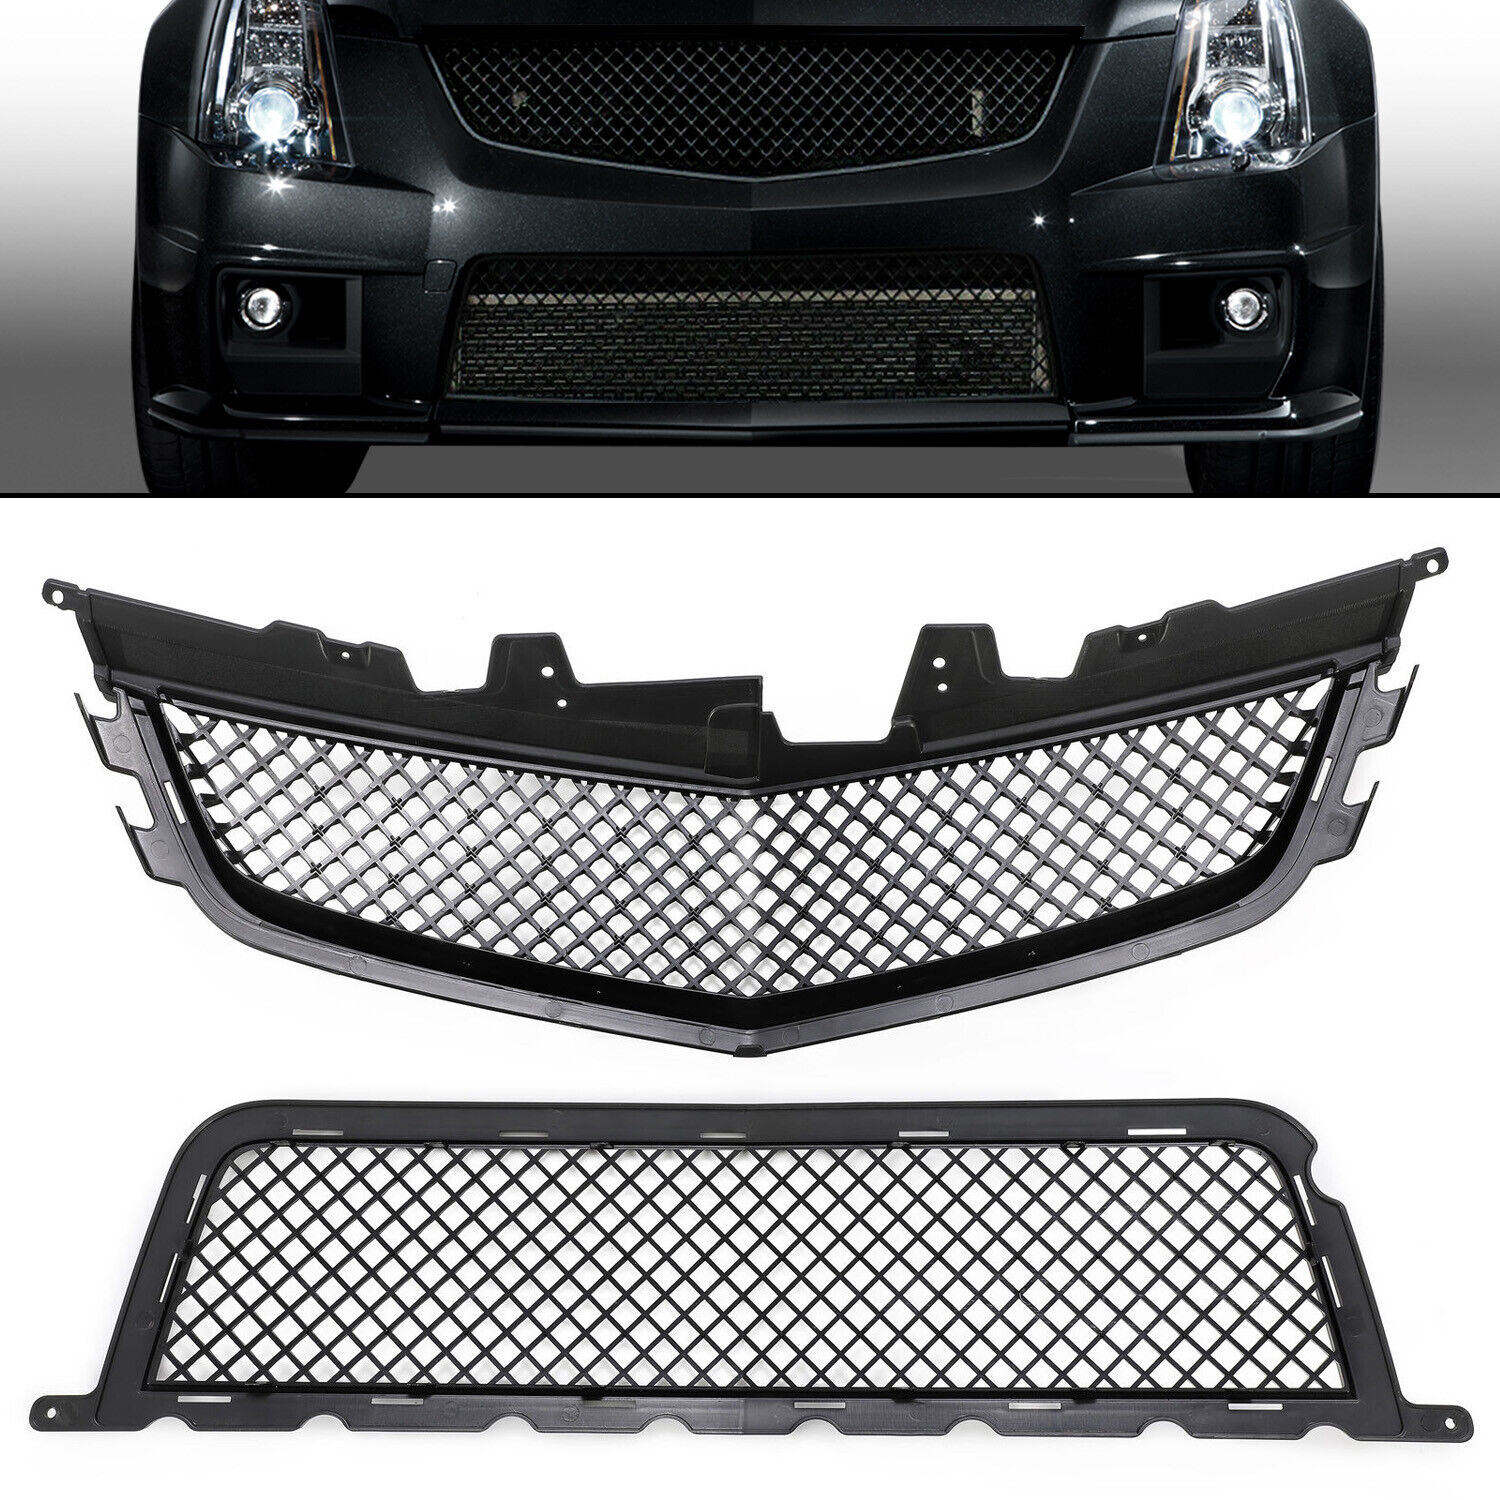 FITS CADILLAC CTS-V CTSV 2008-2014 FRONT UPPER+LOWER MAIN GRILLE - PAINTED BLACK